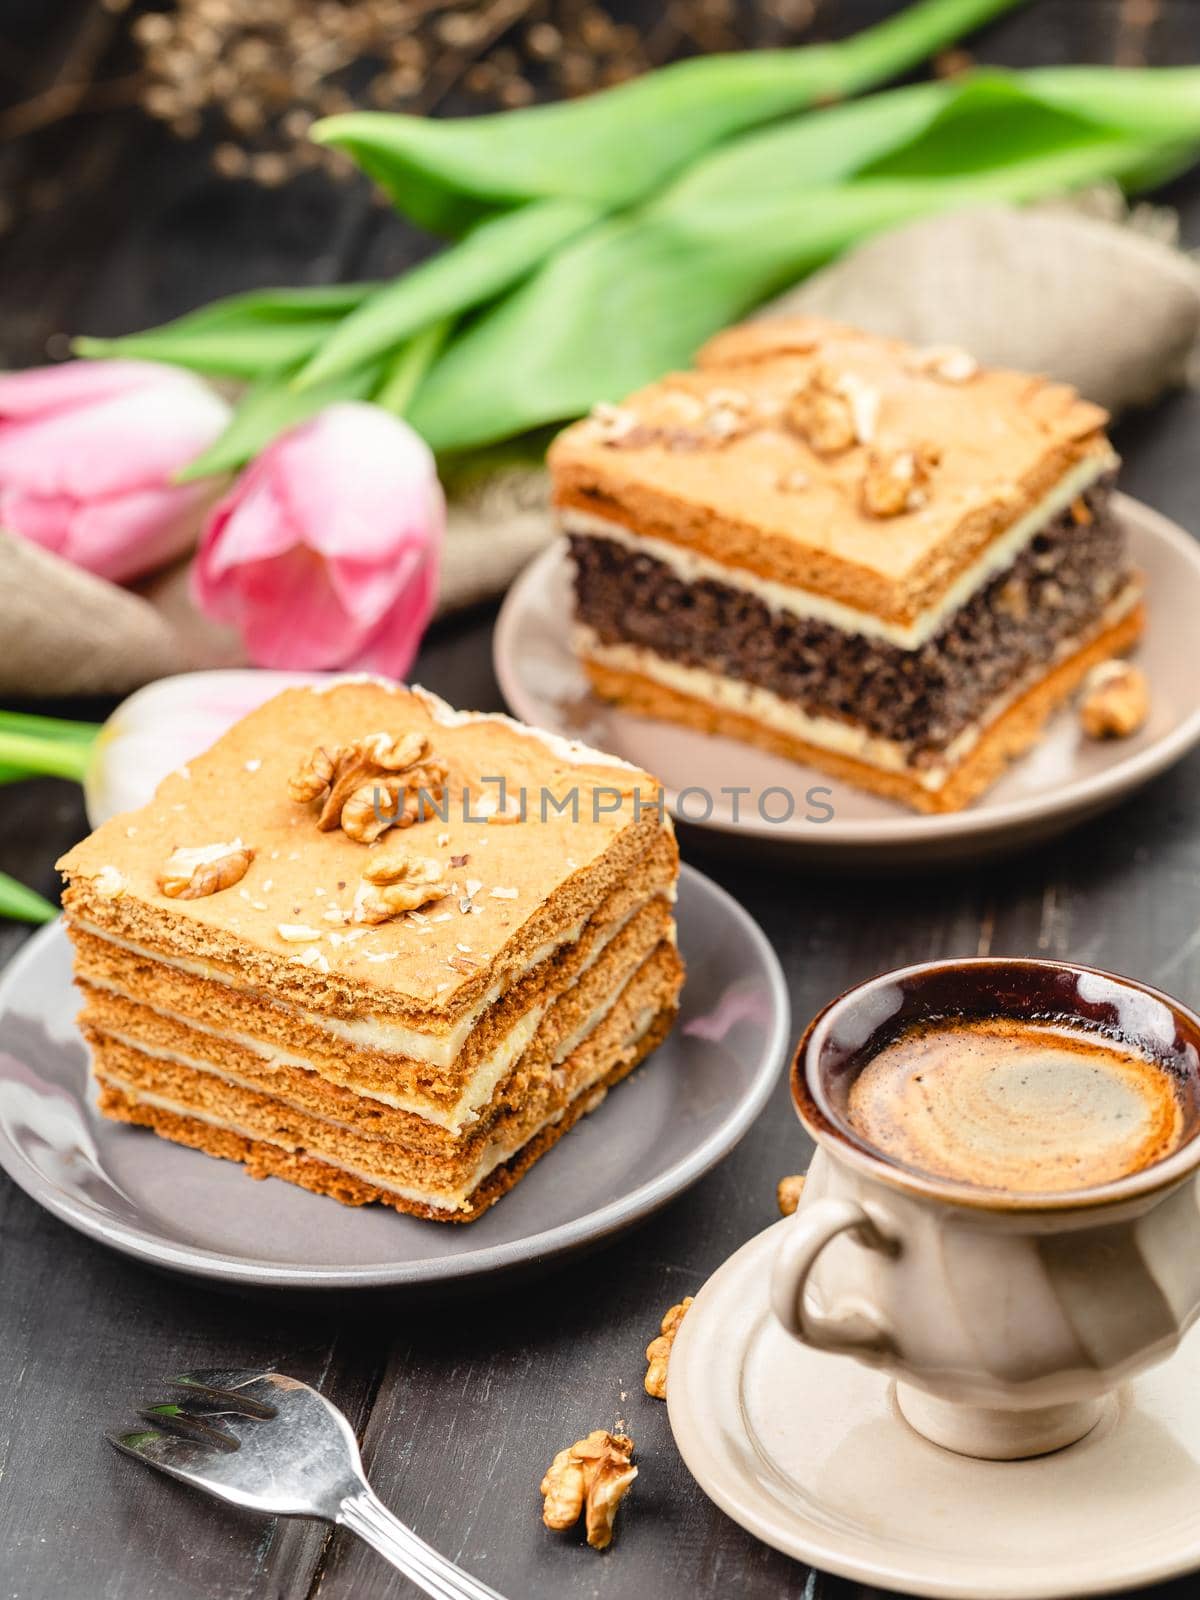 Piece of homemade poppy seed cake and a slice of layered honey cake on the wooden table. Festive set with pastry desserts, cup of coffee and tulip flowers on the background